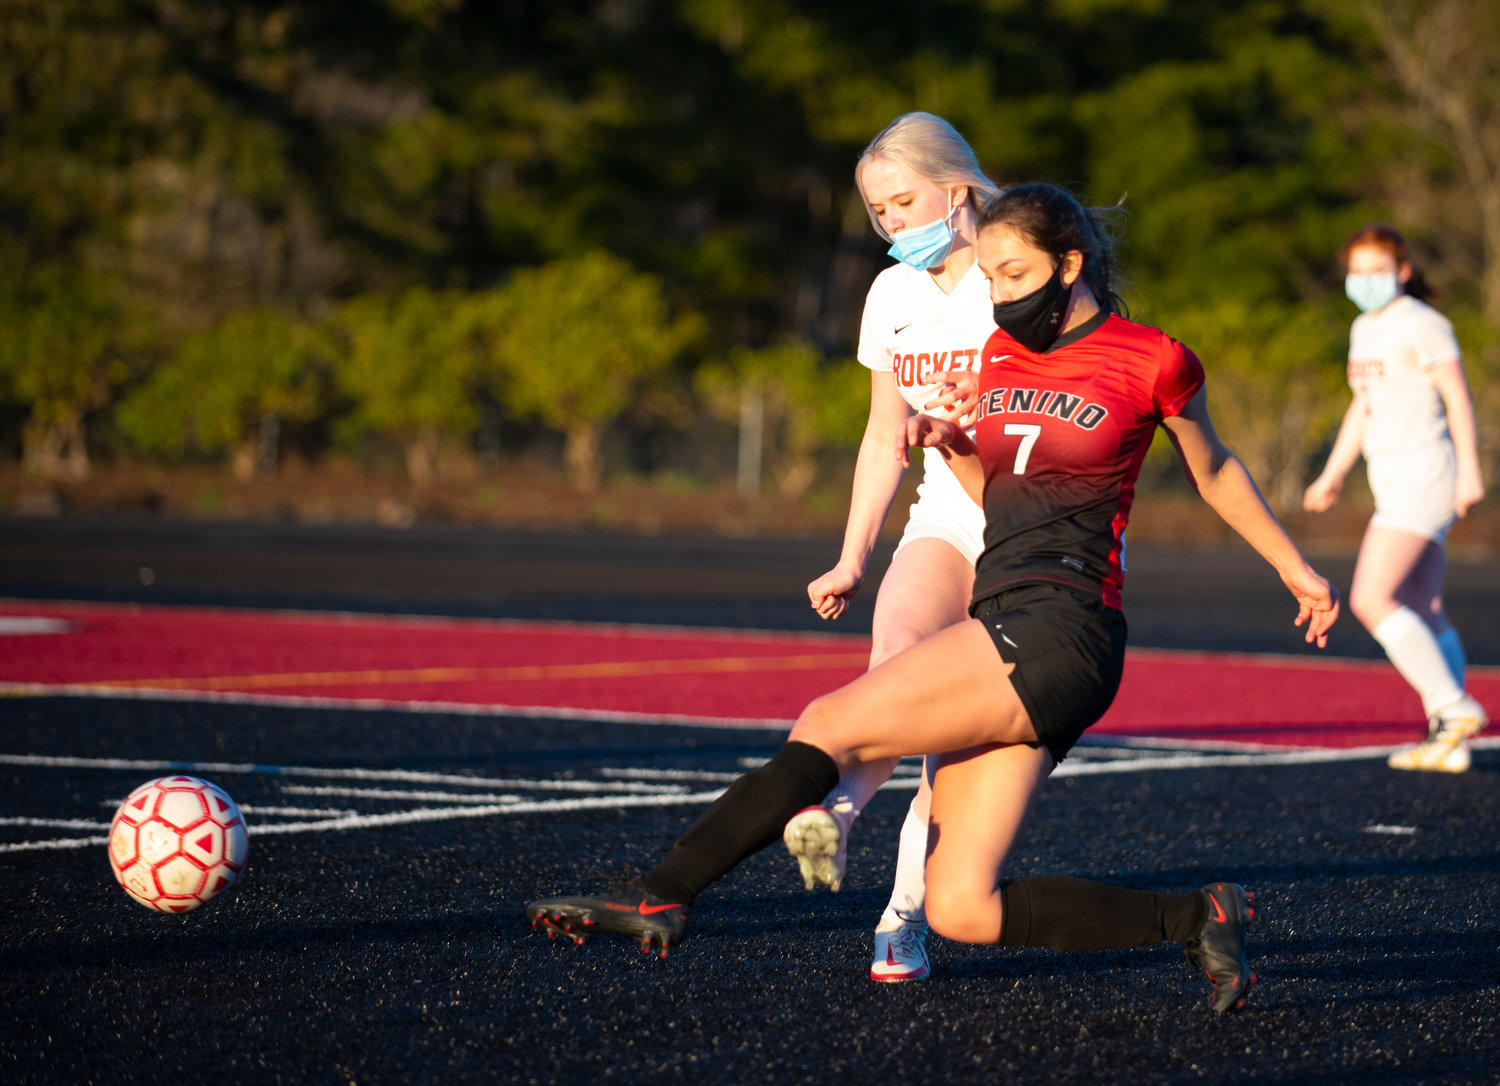 Tenino junior Emma Barr (7) boots the ball away from the sideline against Castle Rock's Elieriq Cole on Monday.